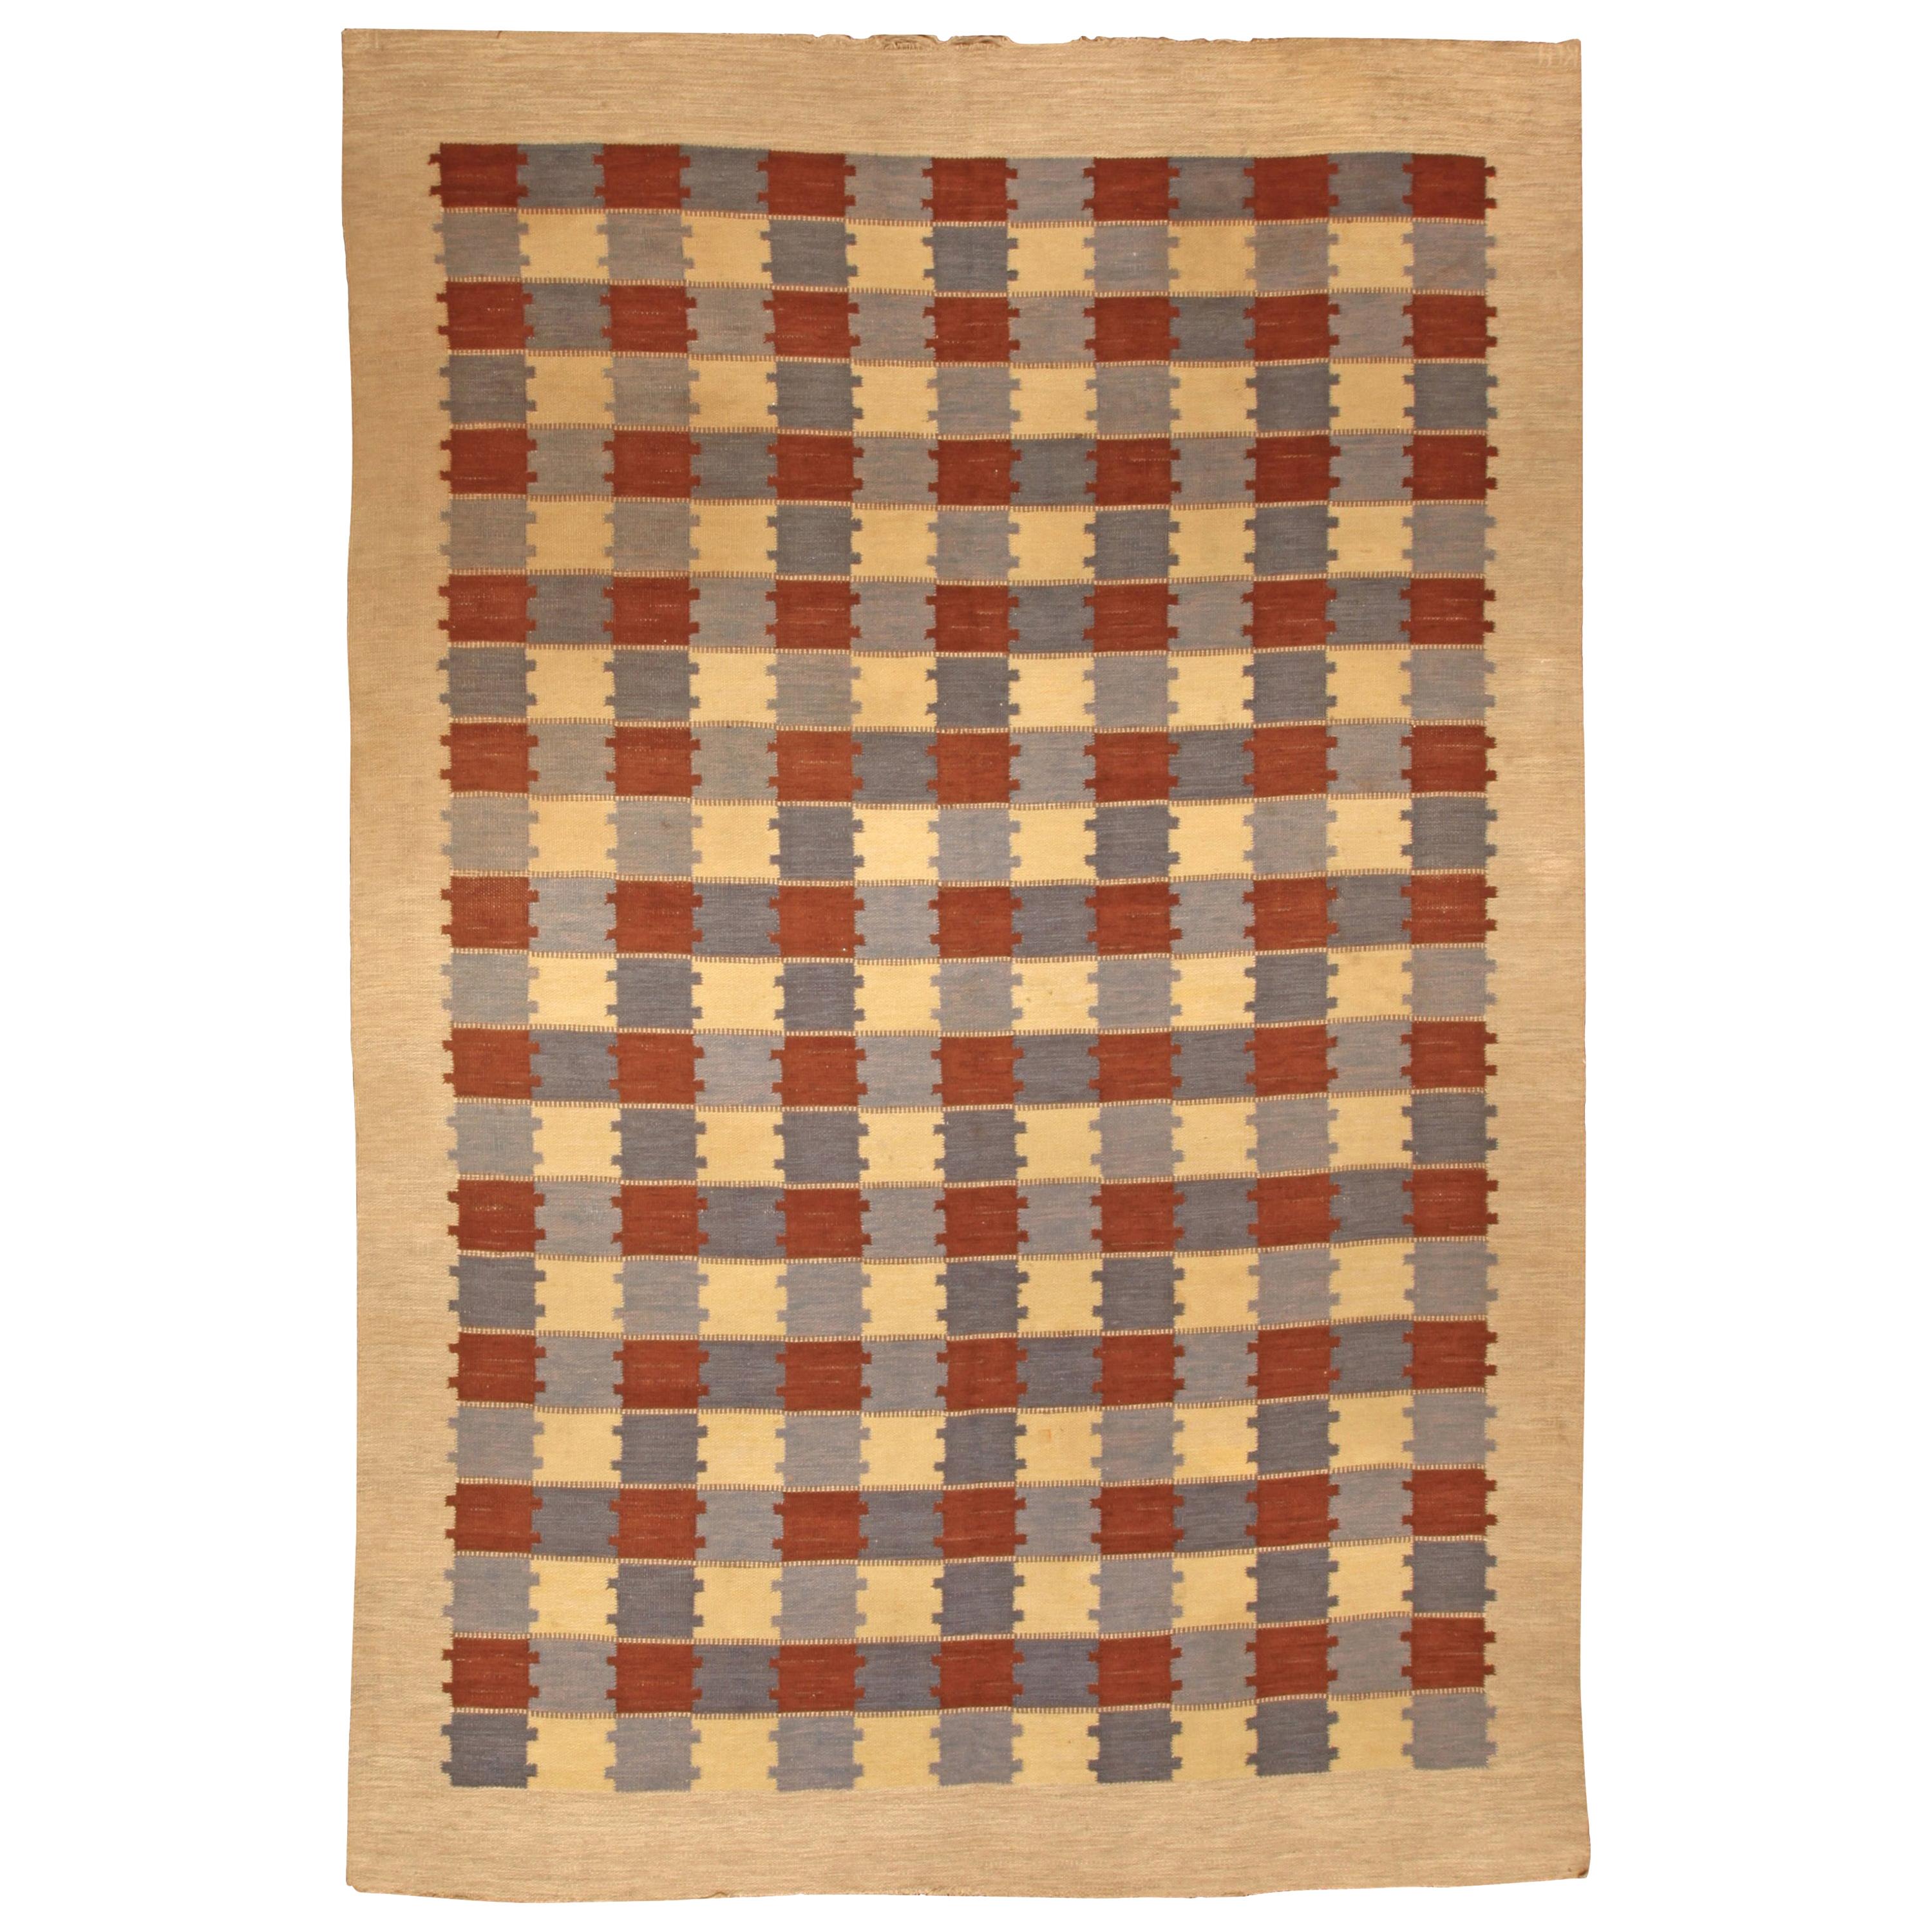 Midcentury Swedish Checkerboard Design Flat-Weave Rug in Gray, Blue and Red